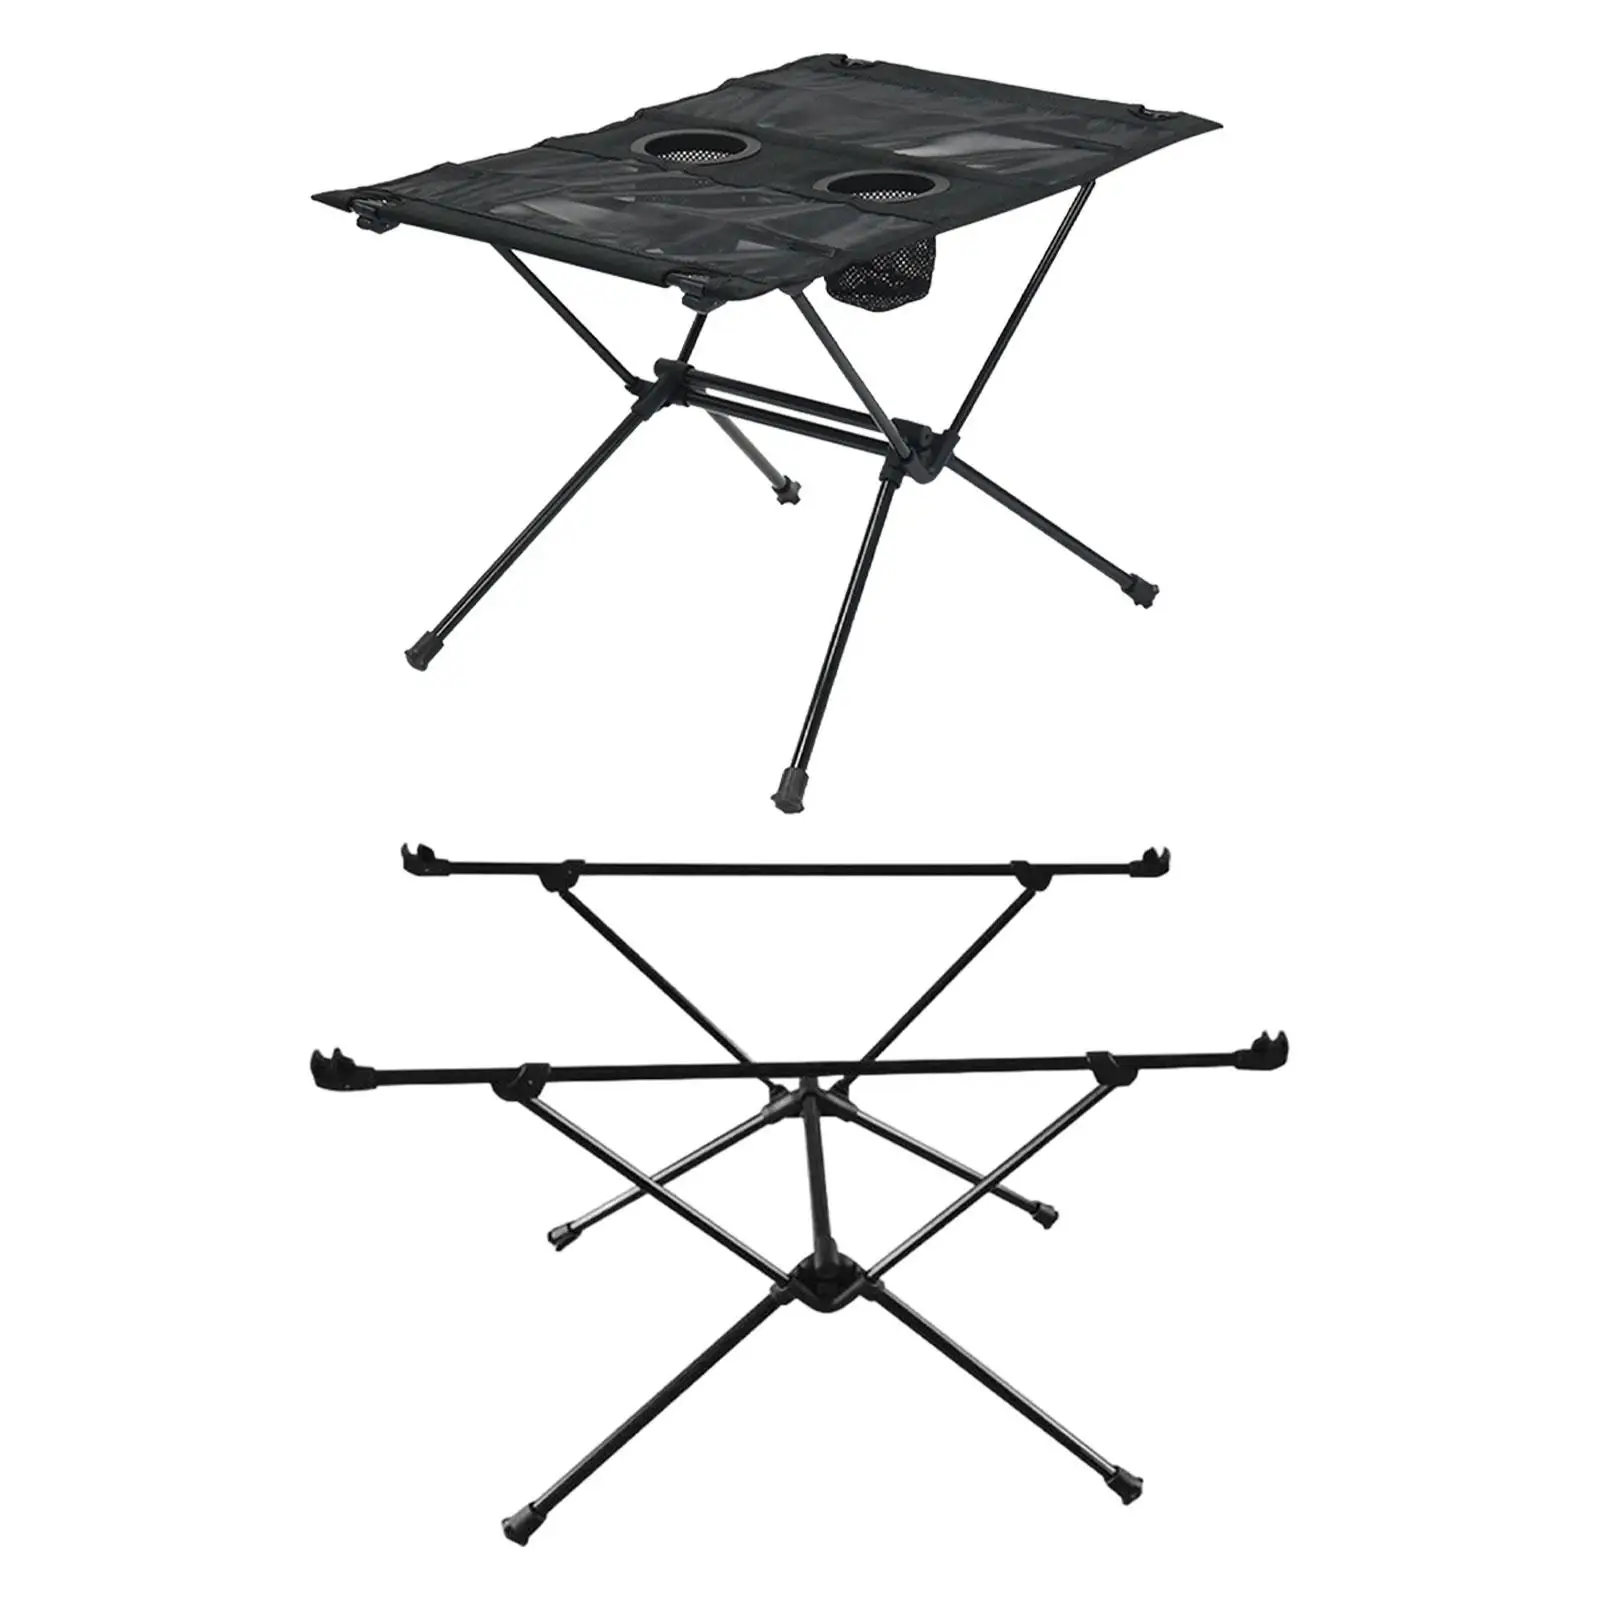 Folding Camping Table Portable Desk Detachable Retractable with Storage Mesh with 2 Cup Holes Aluminum Alloy for Fishing Garden